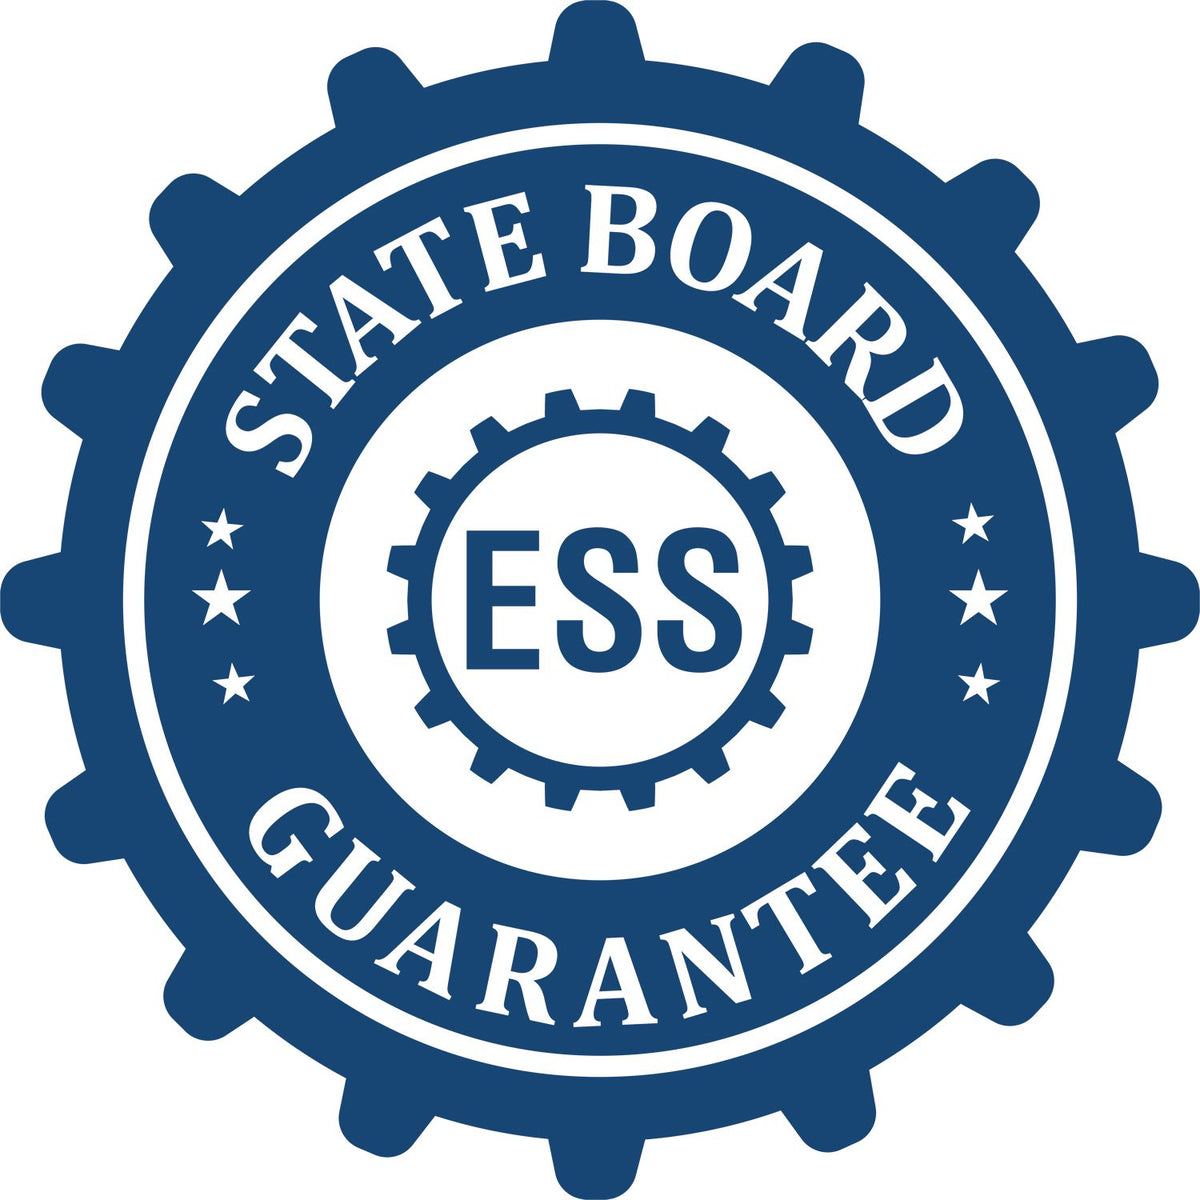 An emblem in a gear shape illustrating a state board guarantee for the Handheld Missouri Professional Geologist Embosser